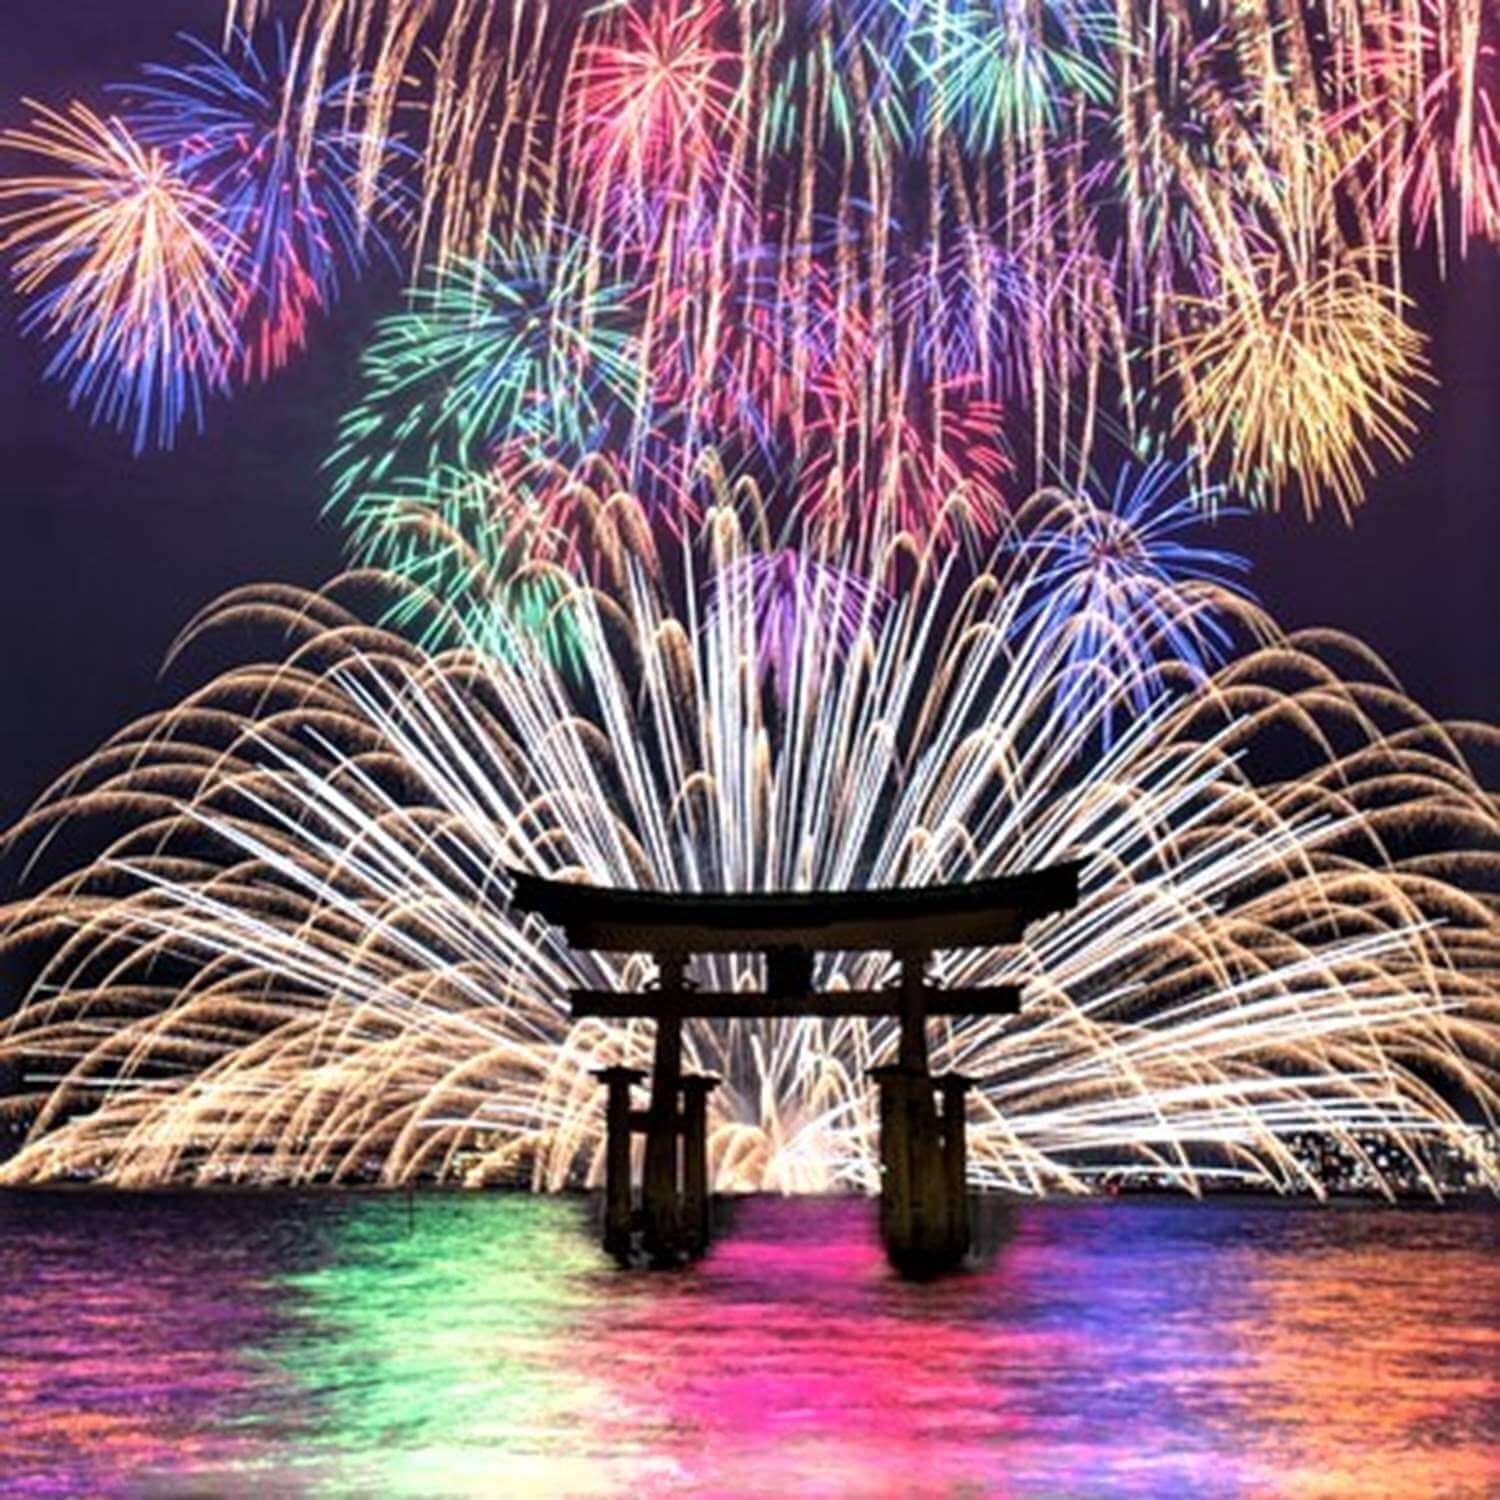 The contrast between the Torii gate of Itsukushima Shrine and the fireworks is beautiful =Pixta